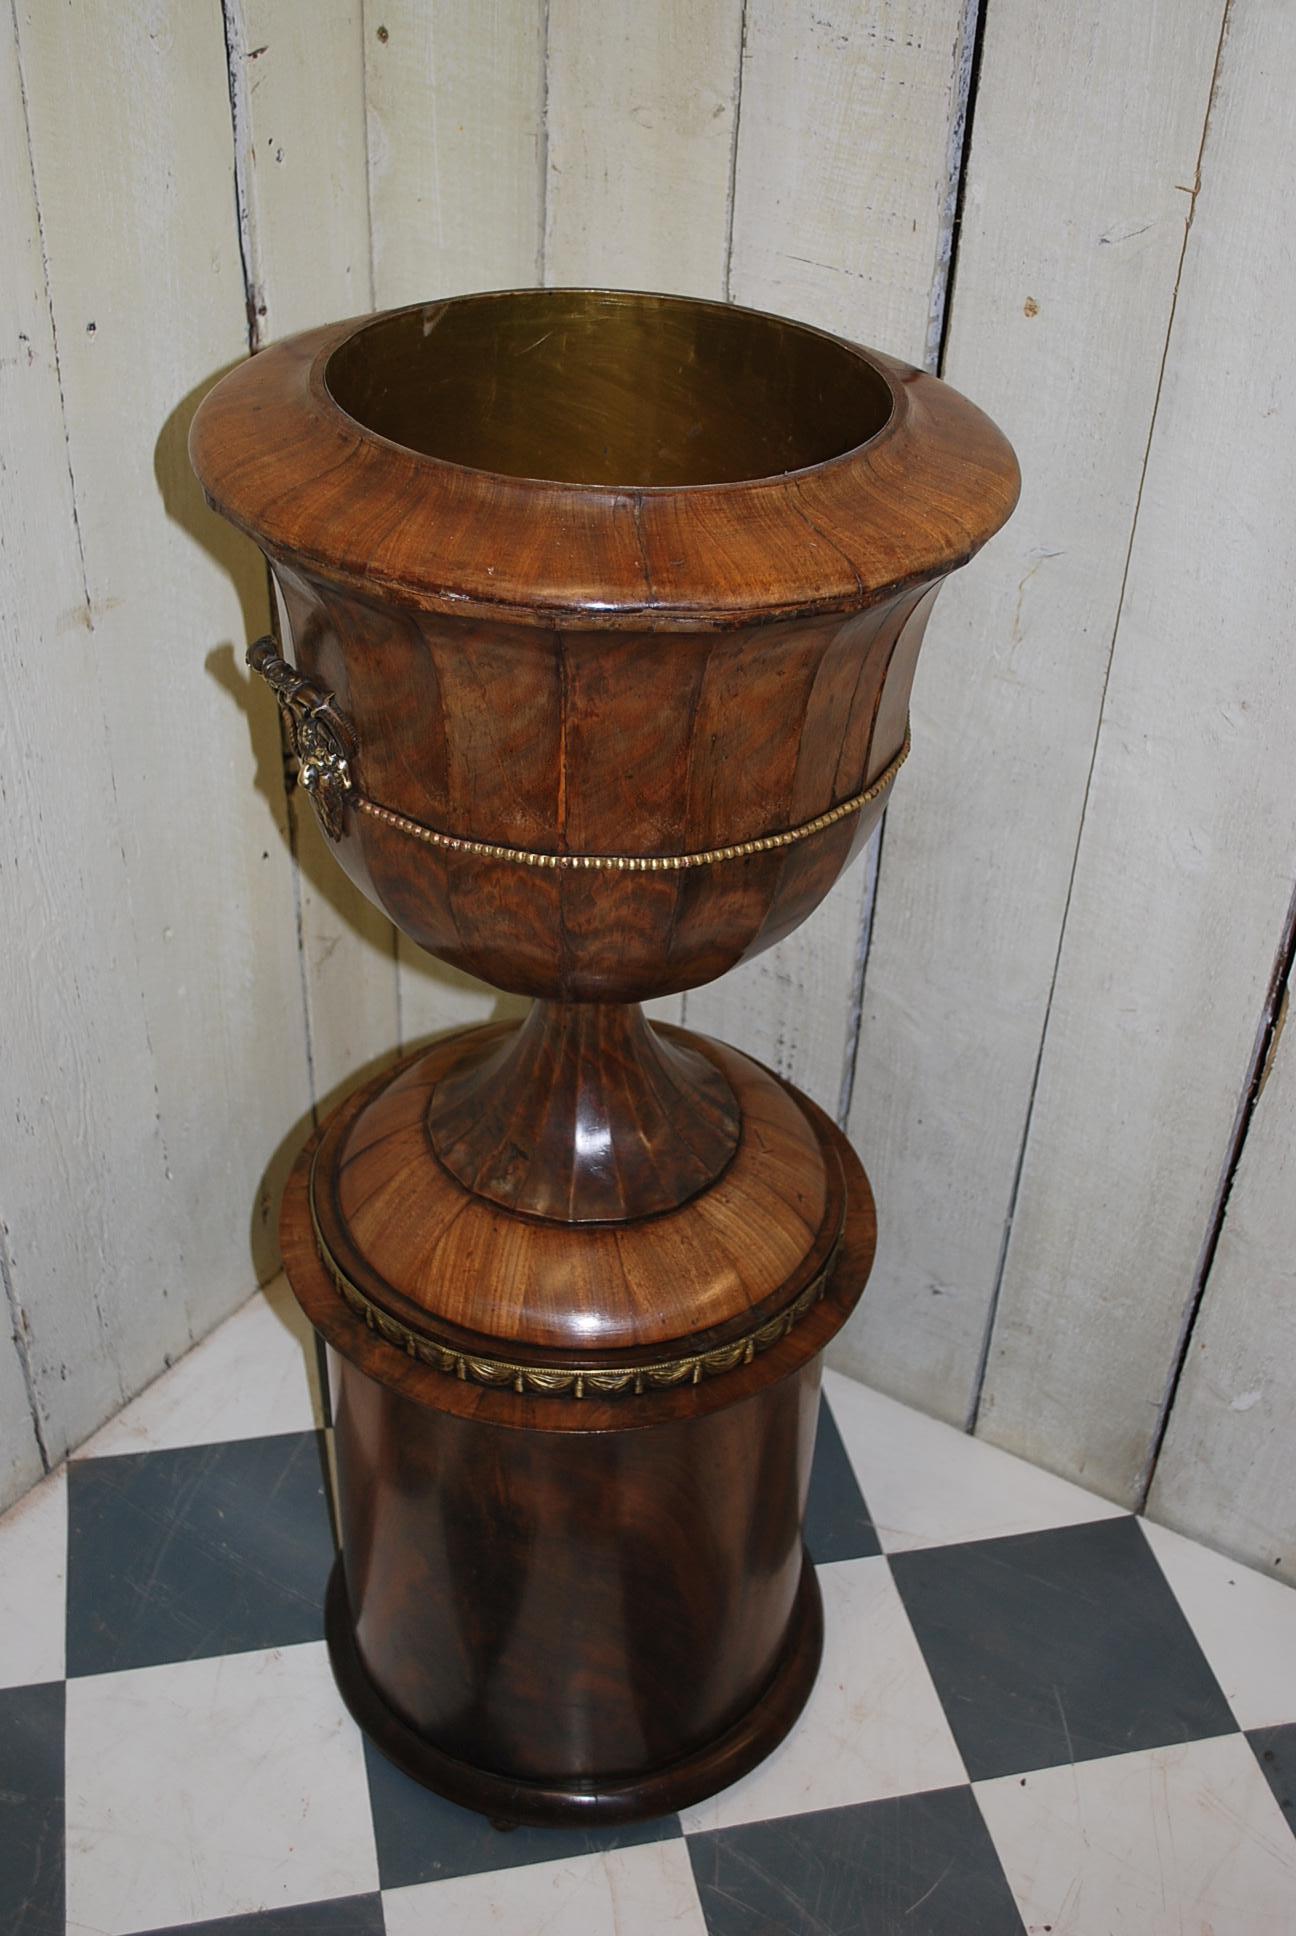 A rare and unusual French jardinière or wine cooler in the form of an urn on a cylindrical pedestal. Made in sections of flamed mahogany, carefully joined together and bolted to the base that opens to reveal a single shelf. Inside the top is a later